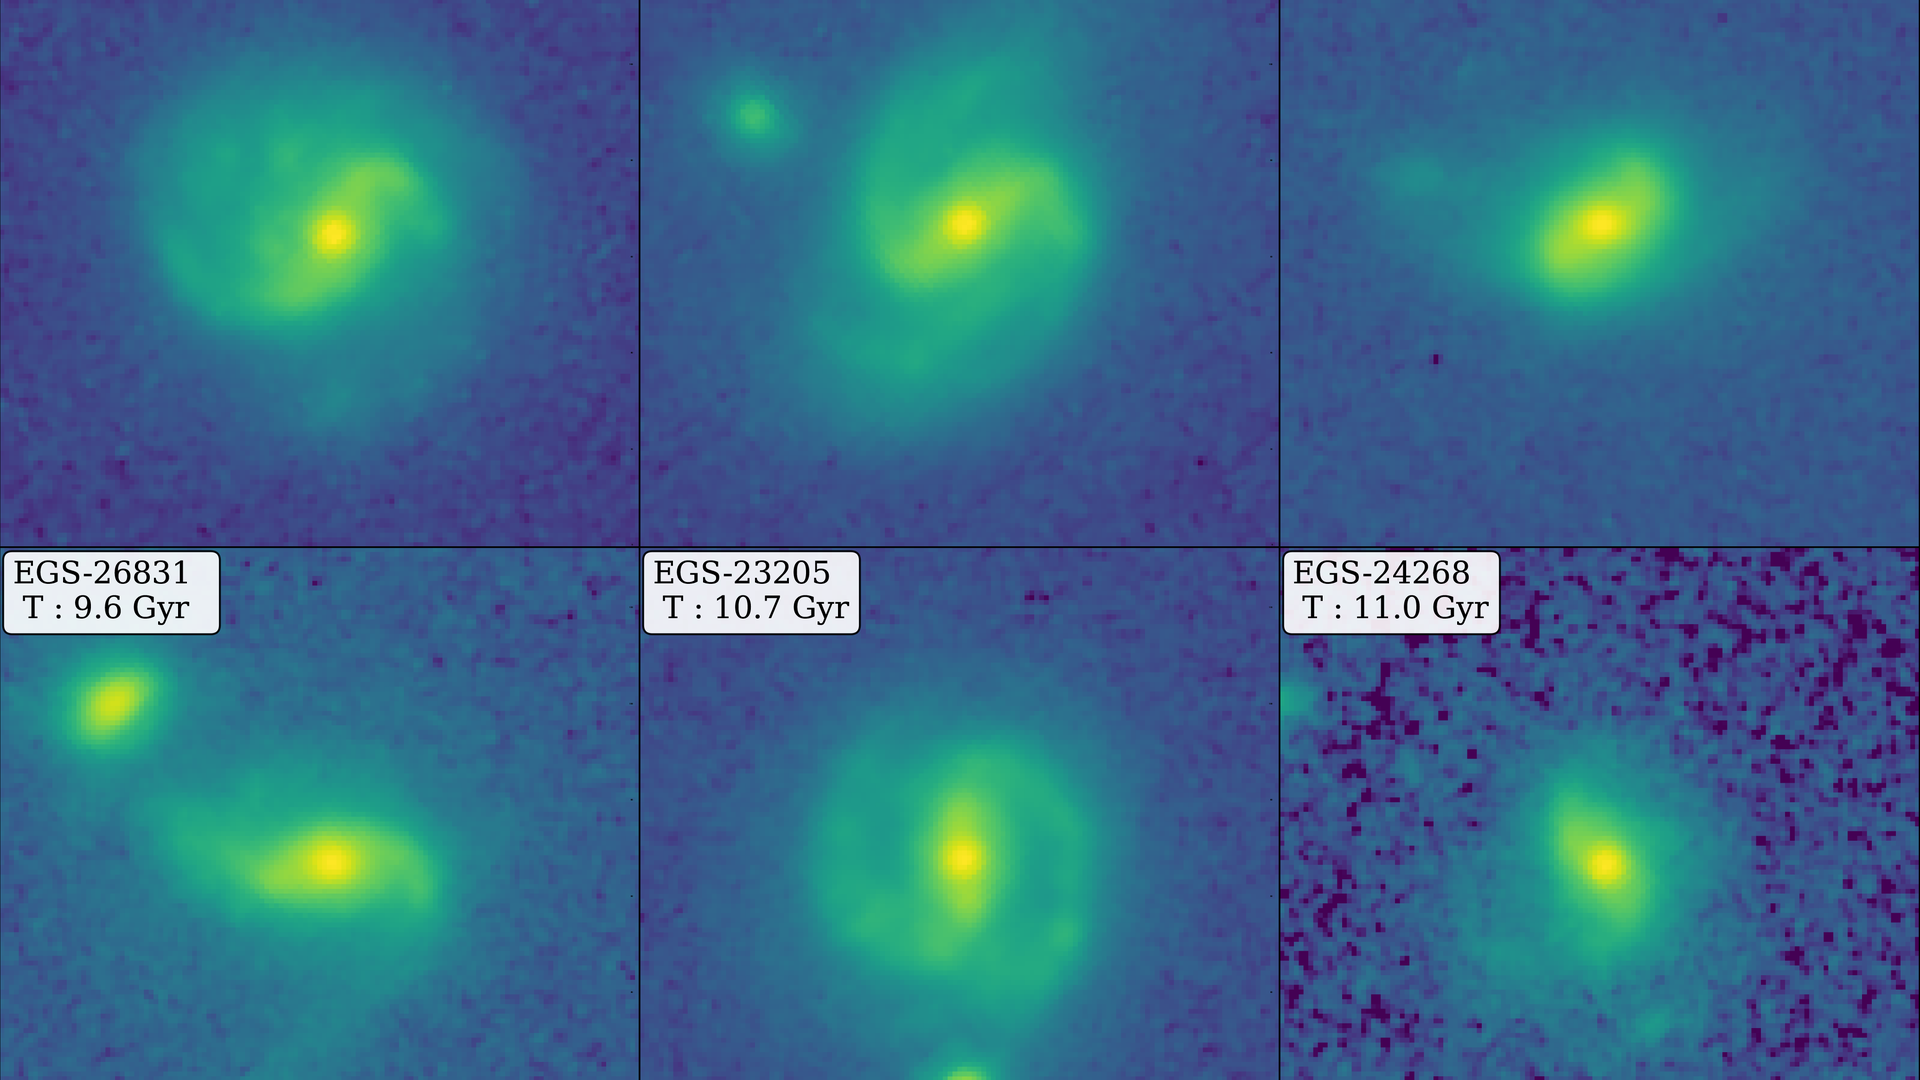 Barred galaxies seen by the James Webb Space Telescope